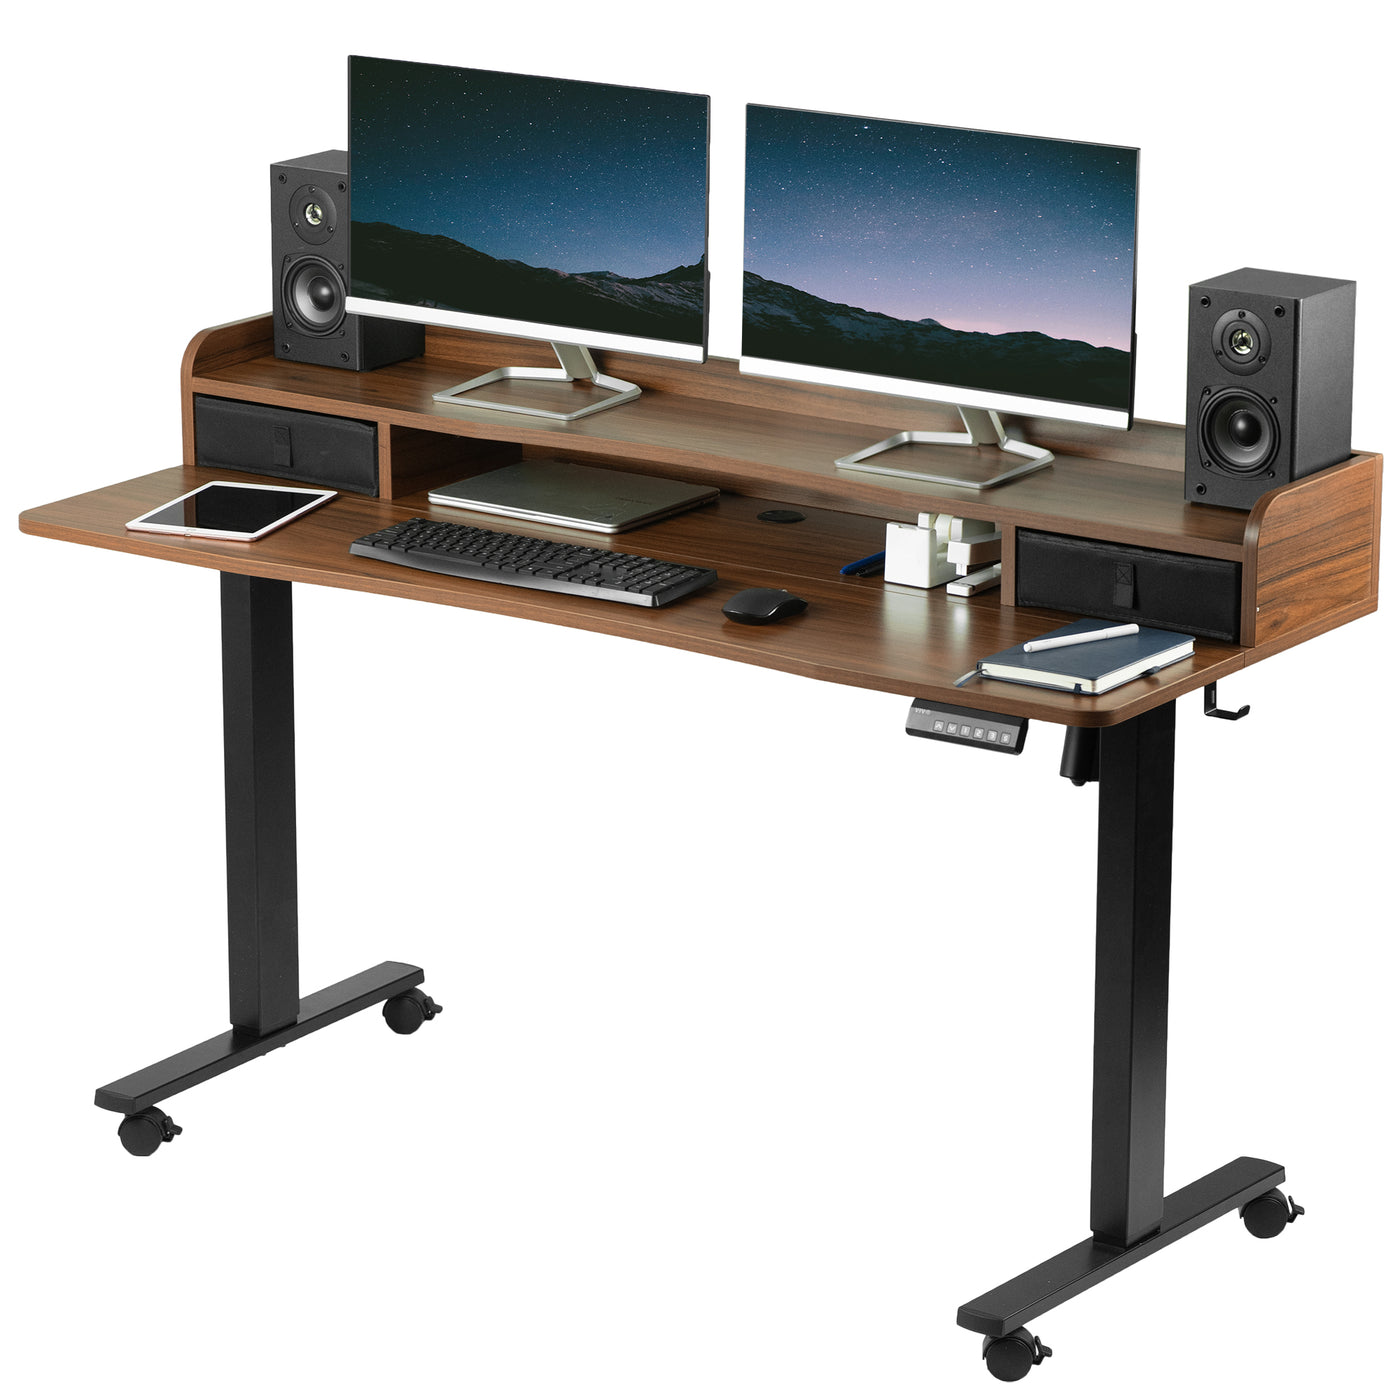 Dual tier height adjustable mobile electric desk with storage drawers.